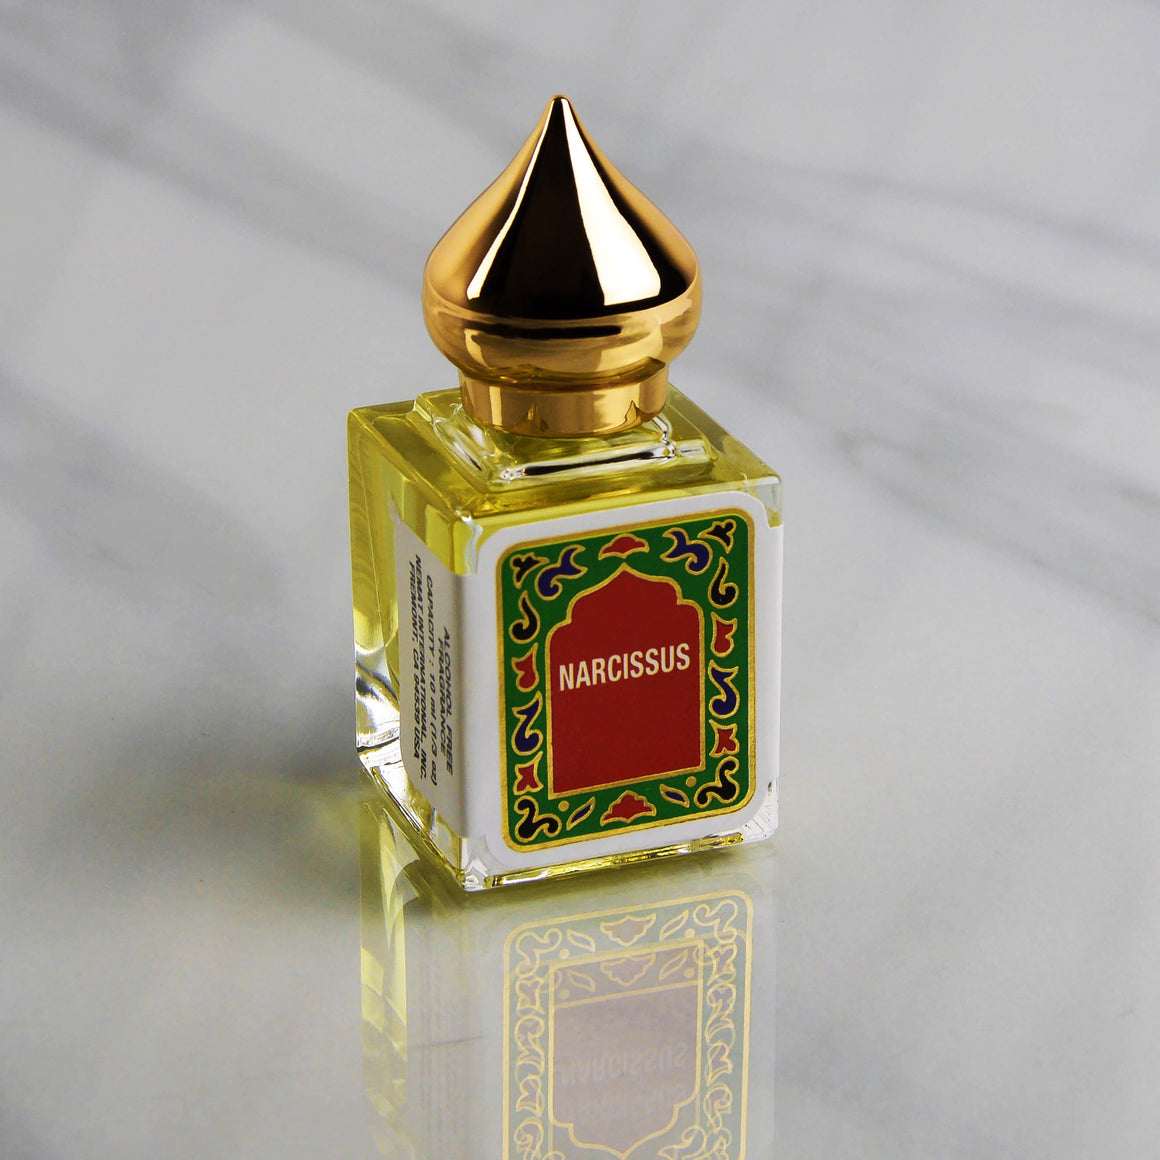 Narcissus - exotic perfumes and fragrances by n̩mat